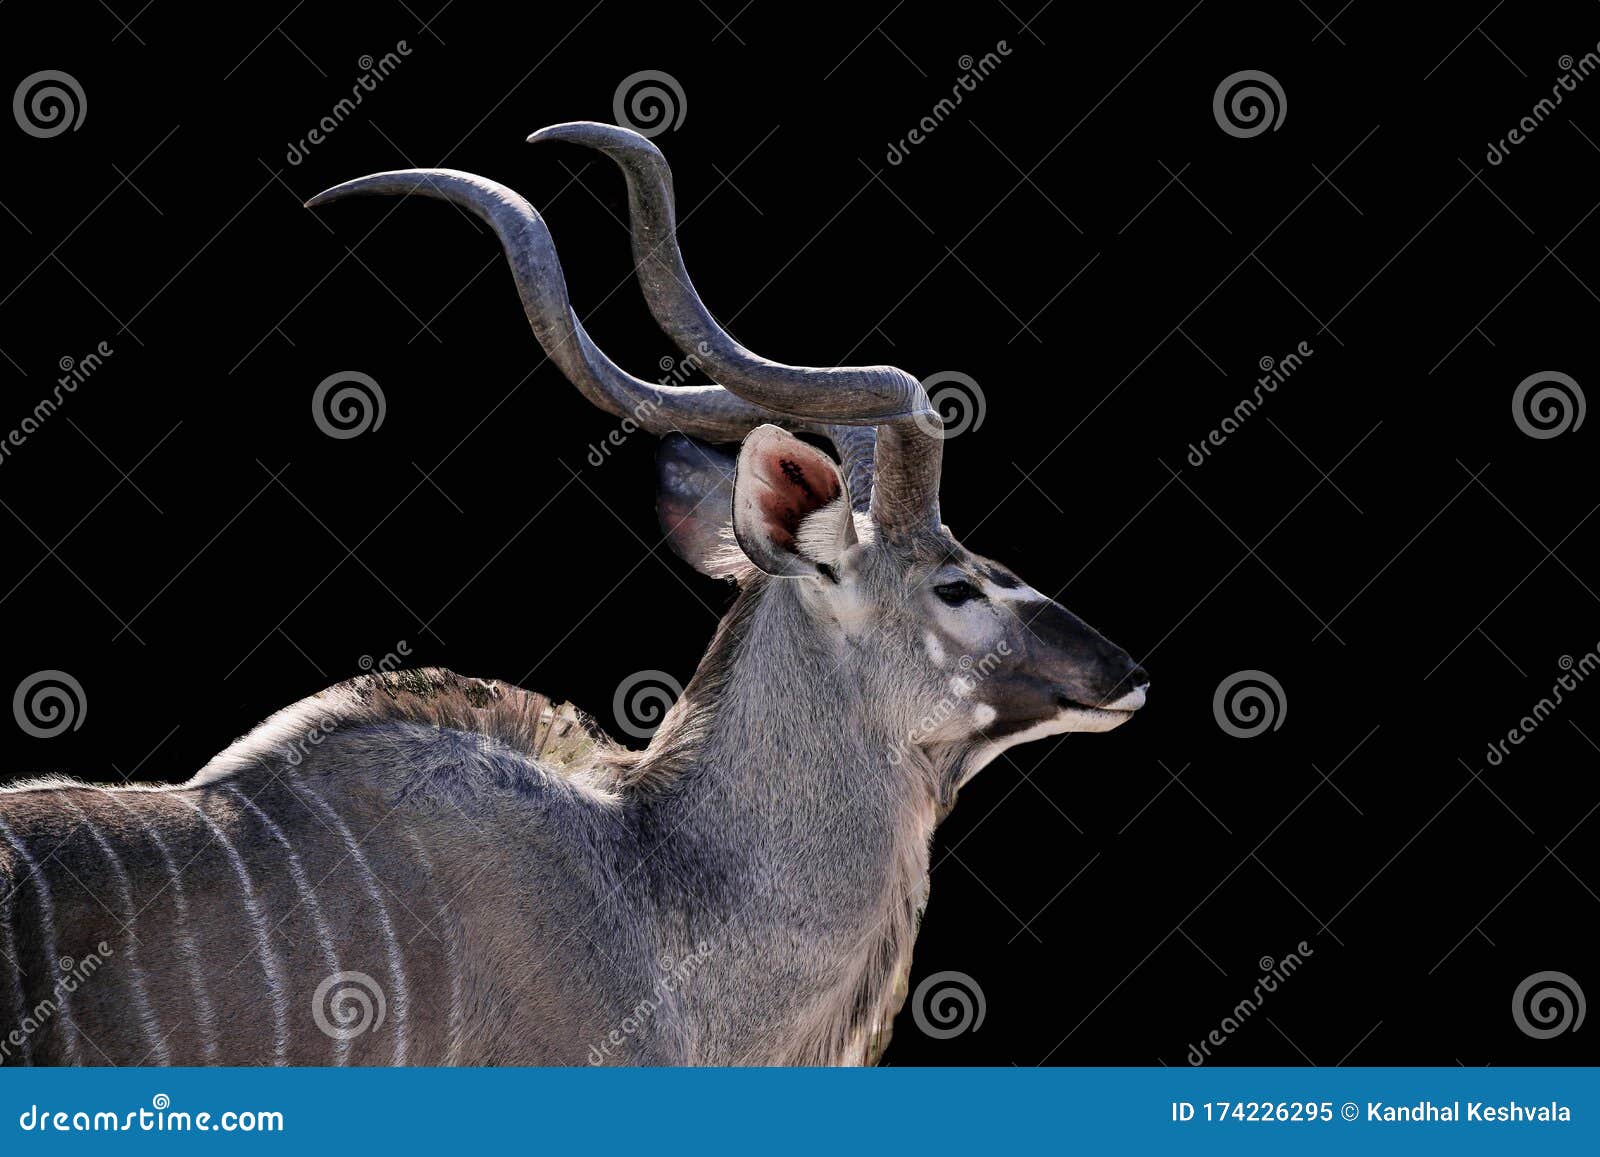 male kudu  on a black background, kudu animal at african forest